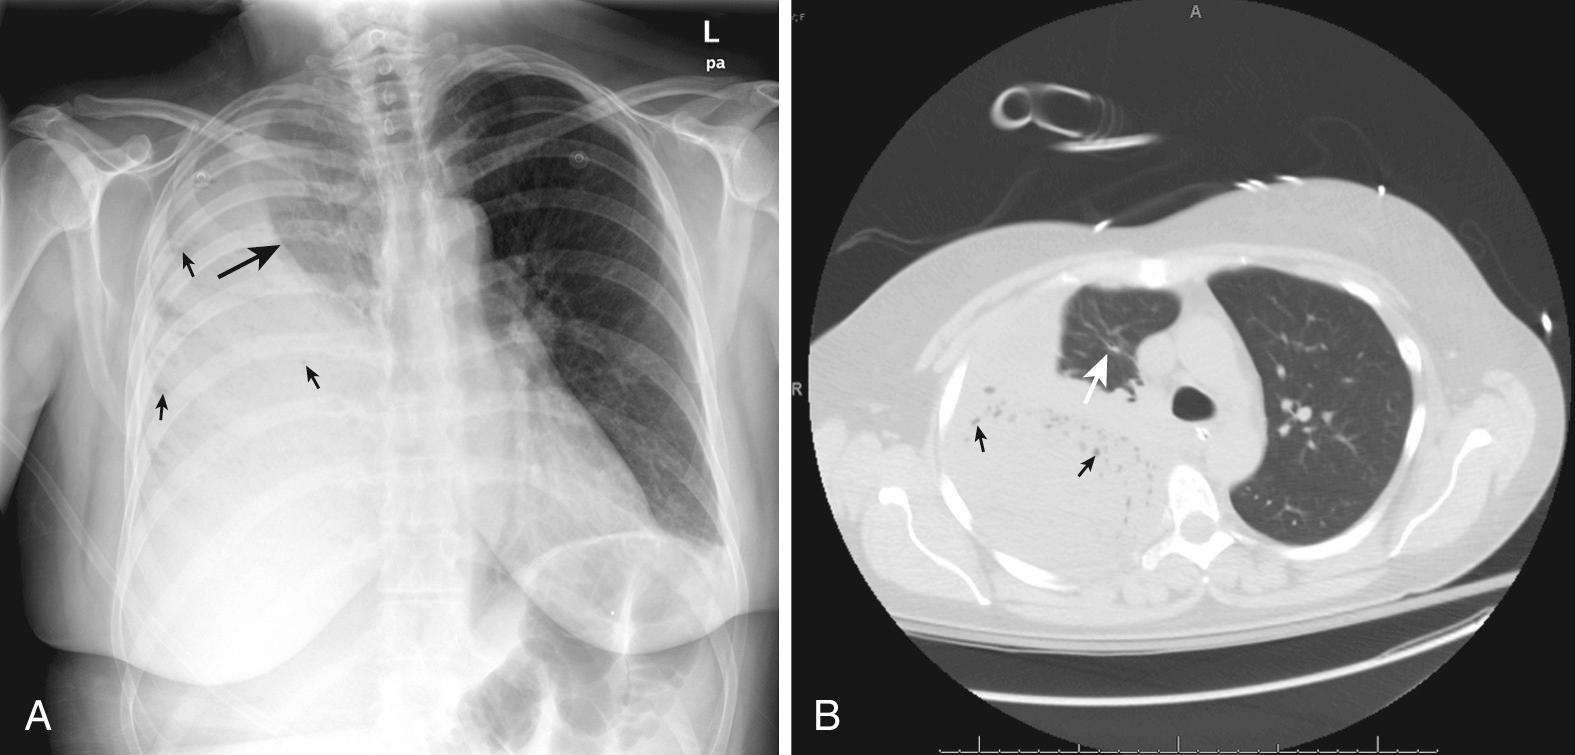 Figure 10.5, Empyema. This 34-year-old patient with a history of alcoholism had fever, cough, pleuritic chest pain, and hypoxia. A, Posteroanterior chest radiograph demonstrating nearly total opacification of the right hemithorax. The presence of a meniscus (large arrow) suggests a pleural effusion. However, small lucent areas (small arrows) can be seen throughout the opacity, which may represent air bronchograms in consolidated lung parenchyma. Thus, a computed tomography (CT) scan was performed. B, CT revealed nearly total collapse of the right lung with only a small portion of the apex remaining inflated (white arrow). A massive pleural collection was found with gas bubbles throughout (black arrows), suggestive of pyogenic empyema. Tube thoracostomy was performed and more than 1700 mL of purulent fluid was drained. Fluid cultures grew Streptococcus anginosus .